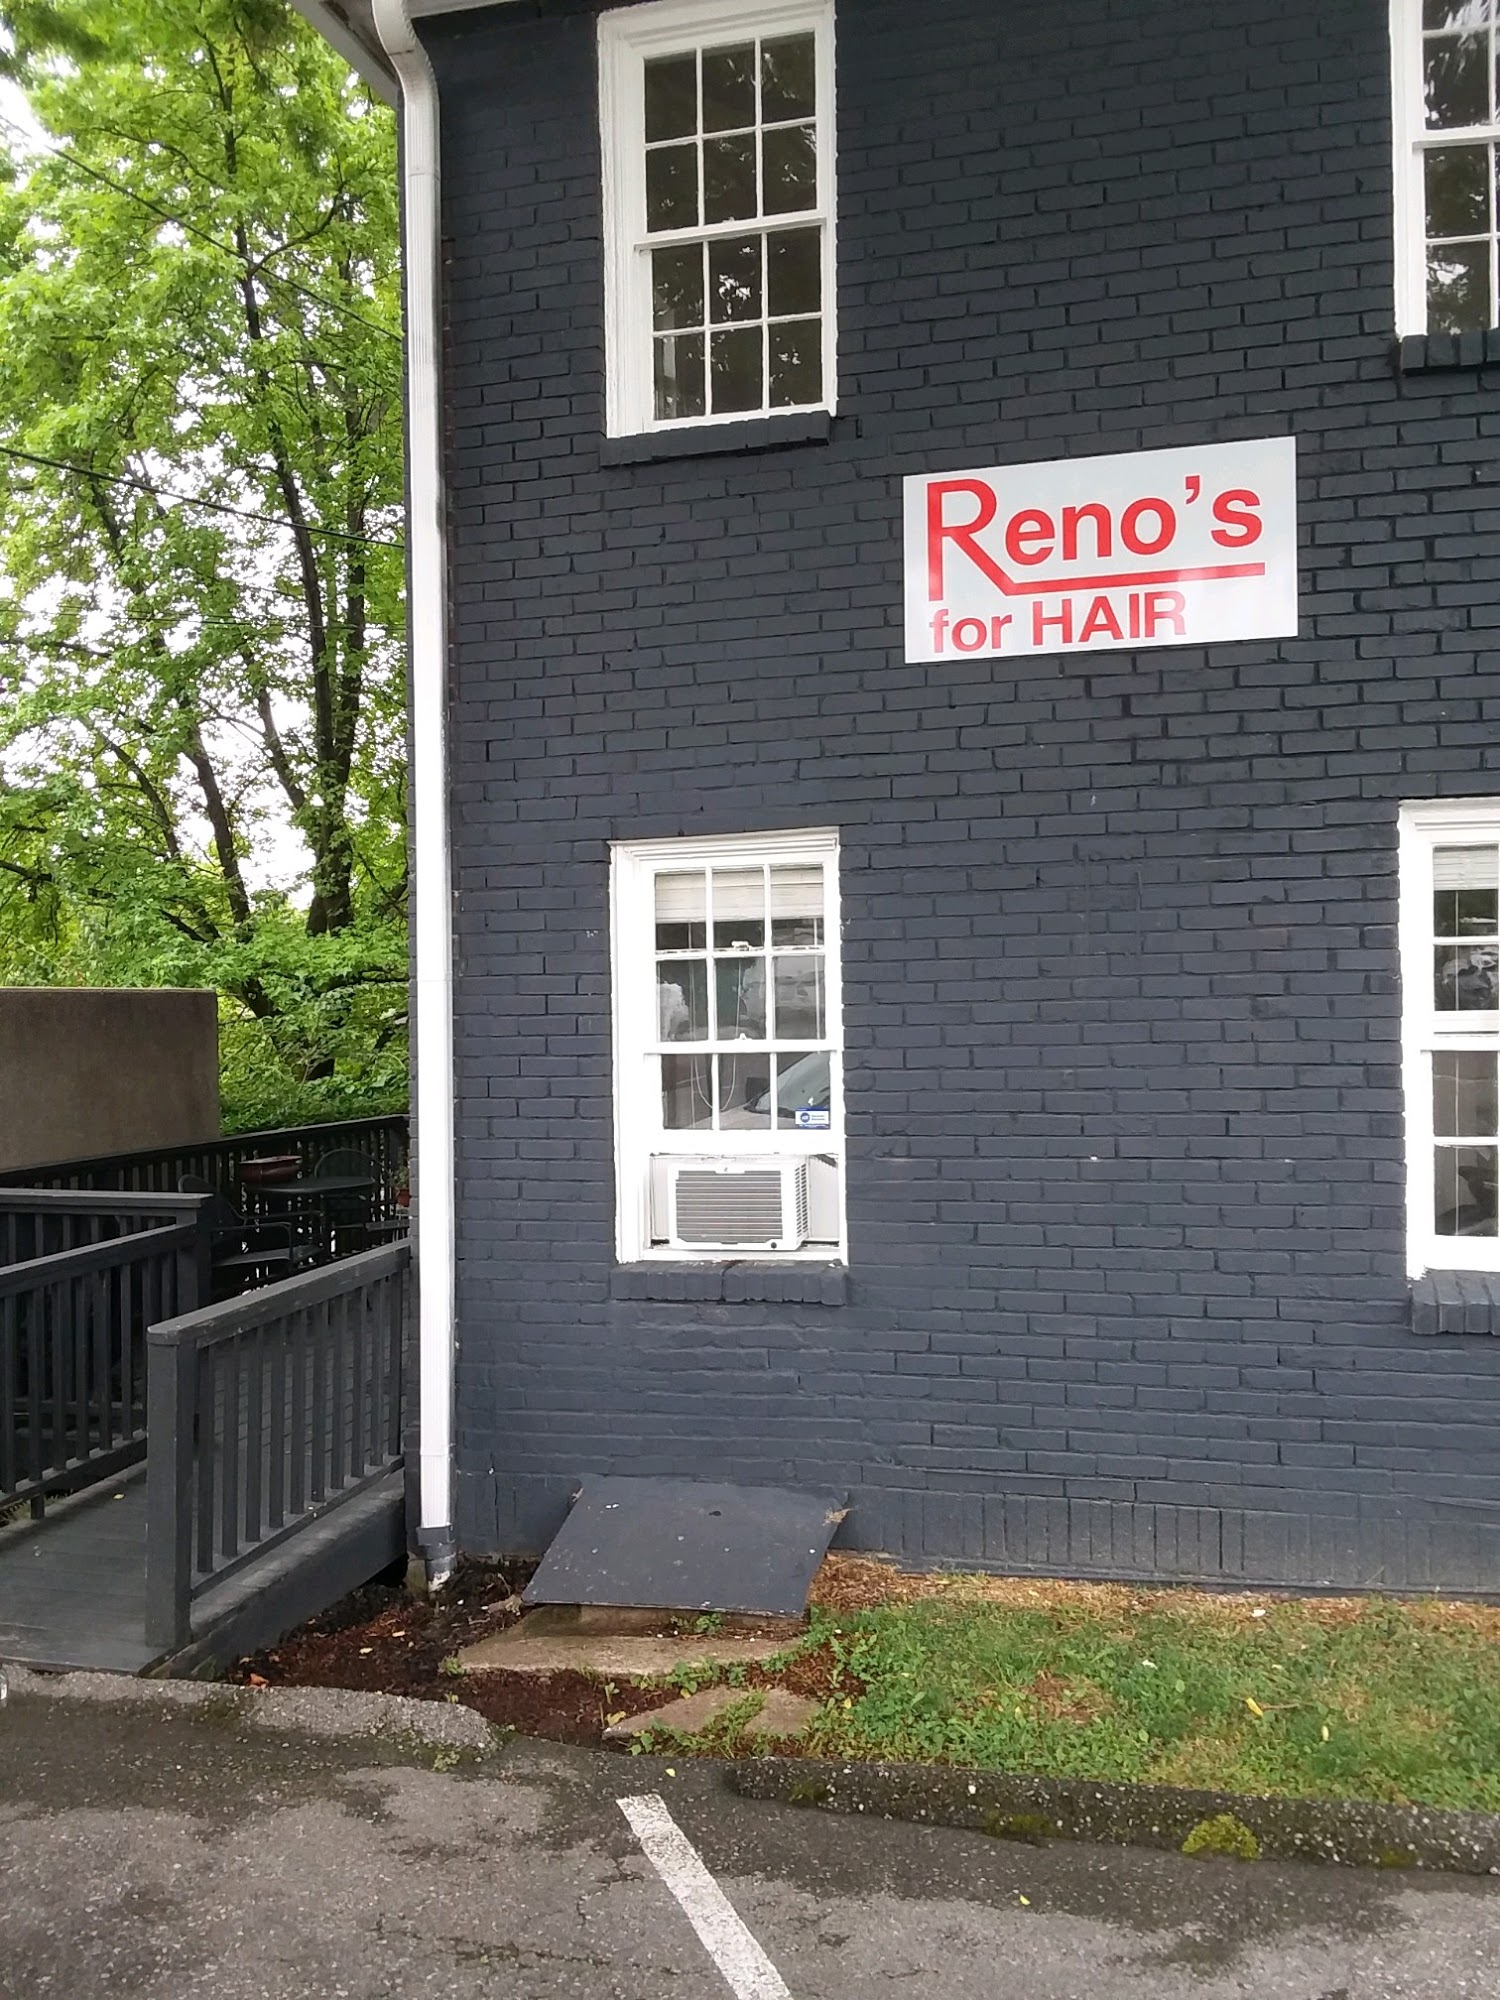 Reno's for Hair